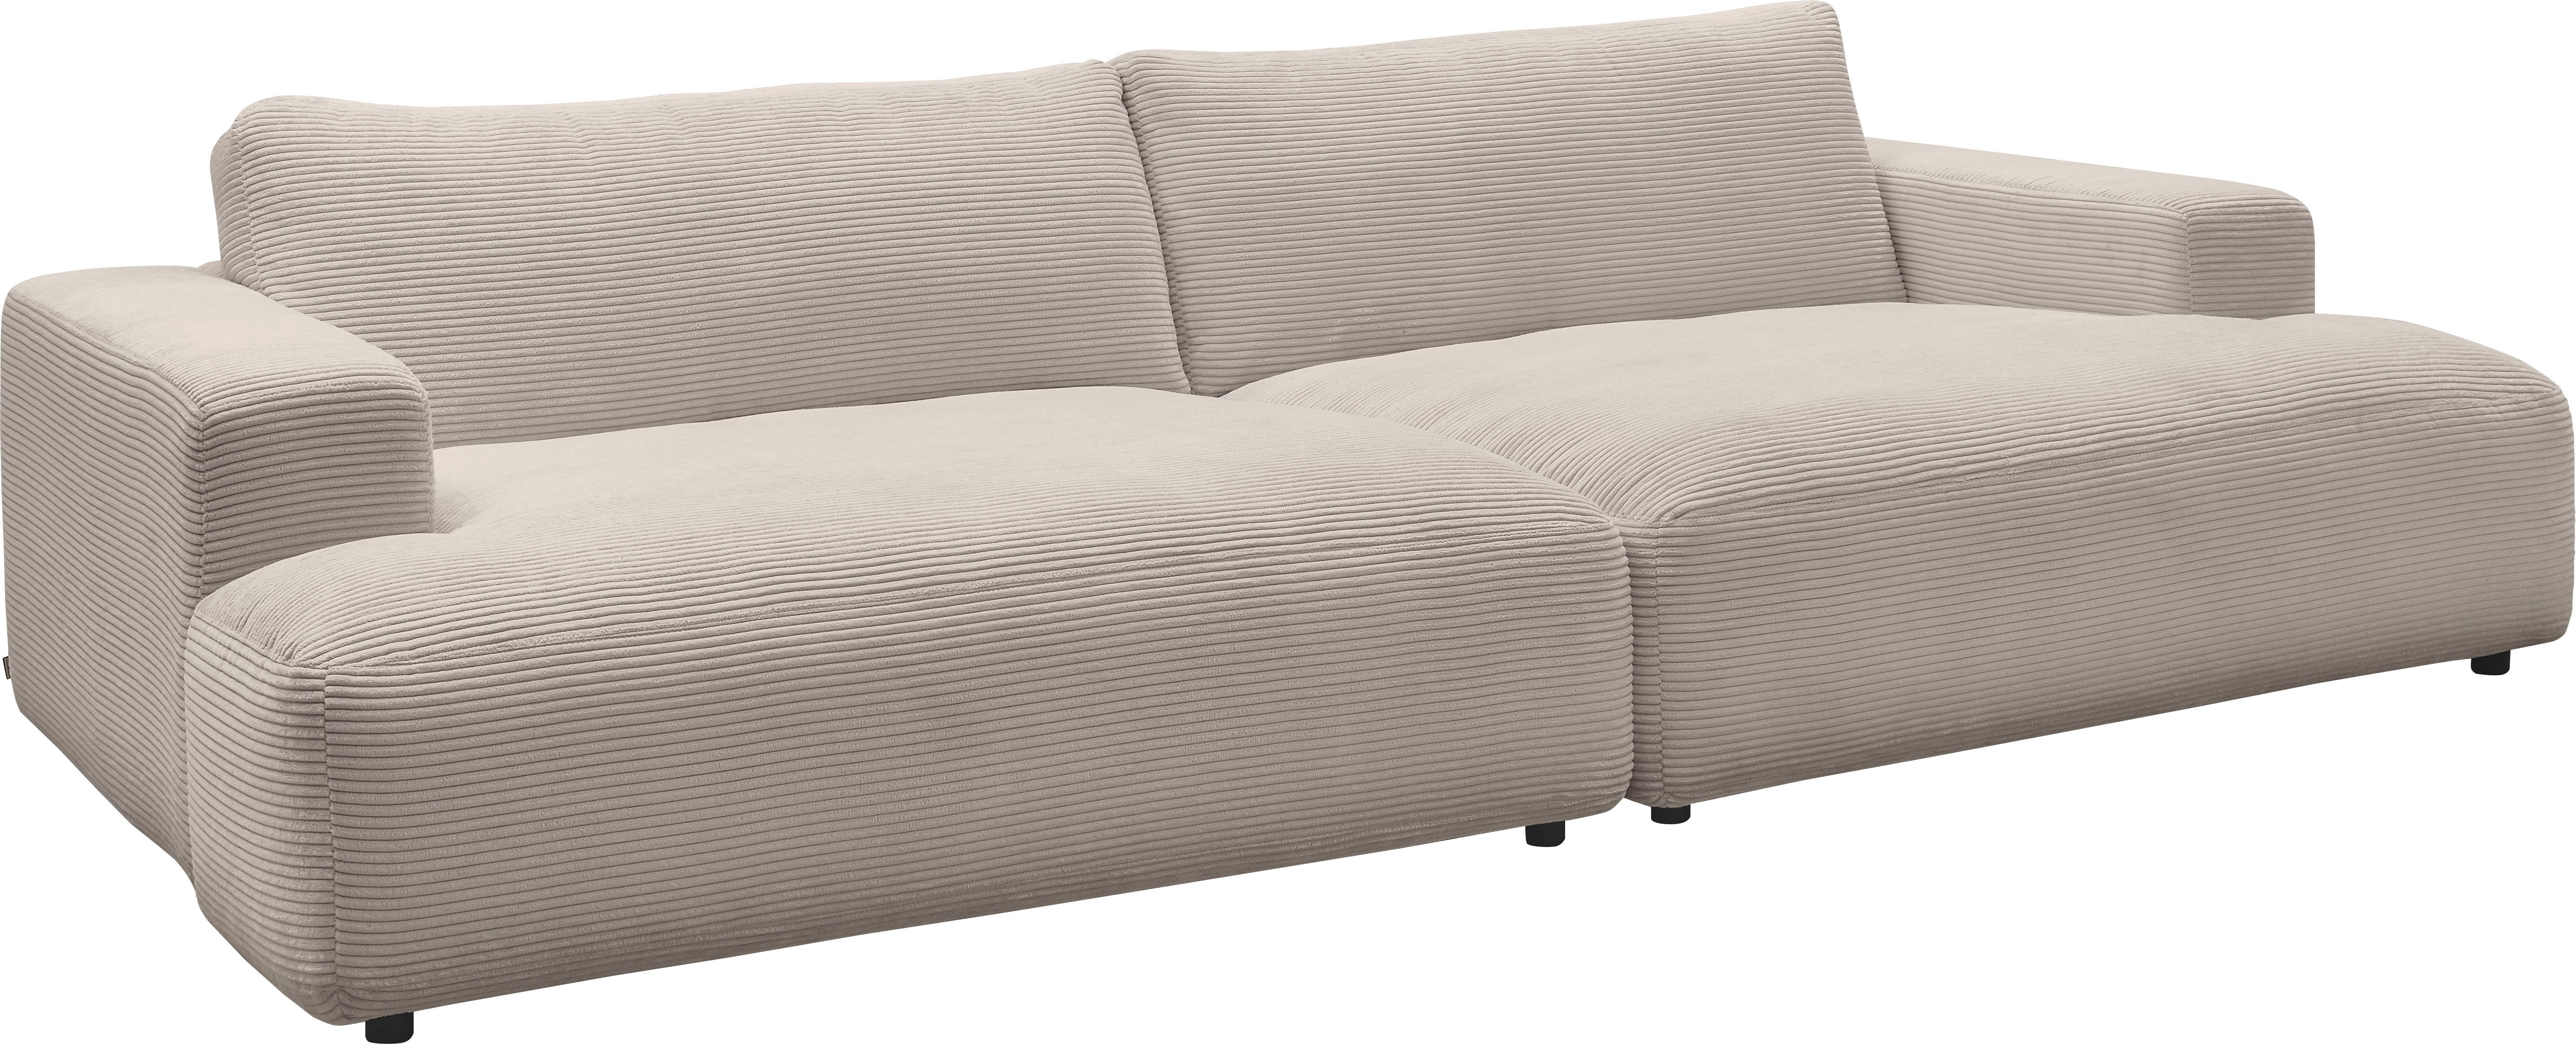 by M Lucia, light-grey 292 branded GALLERY Breite Loungesofa cm Musterring Cord-Bezug,